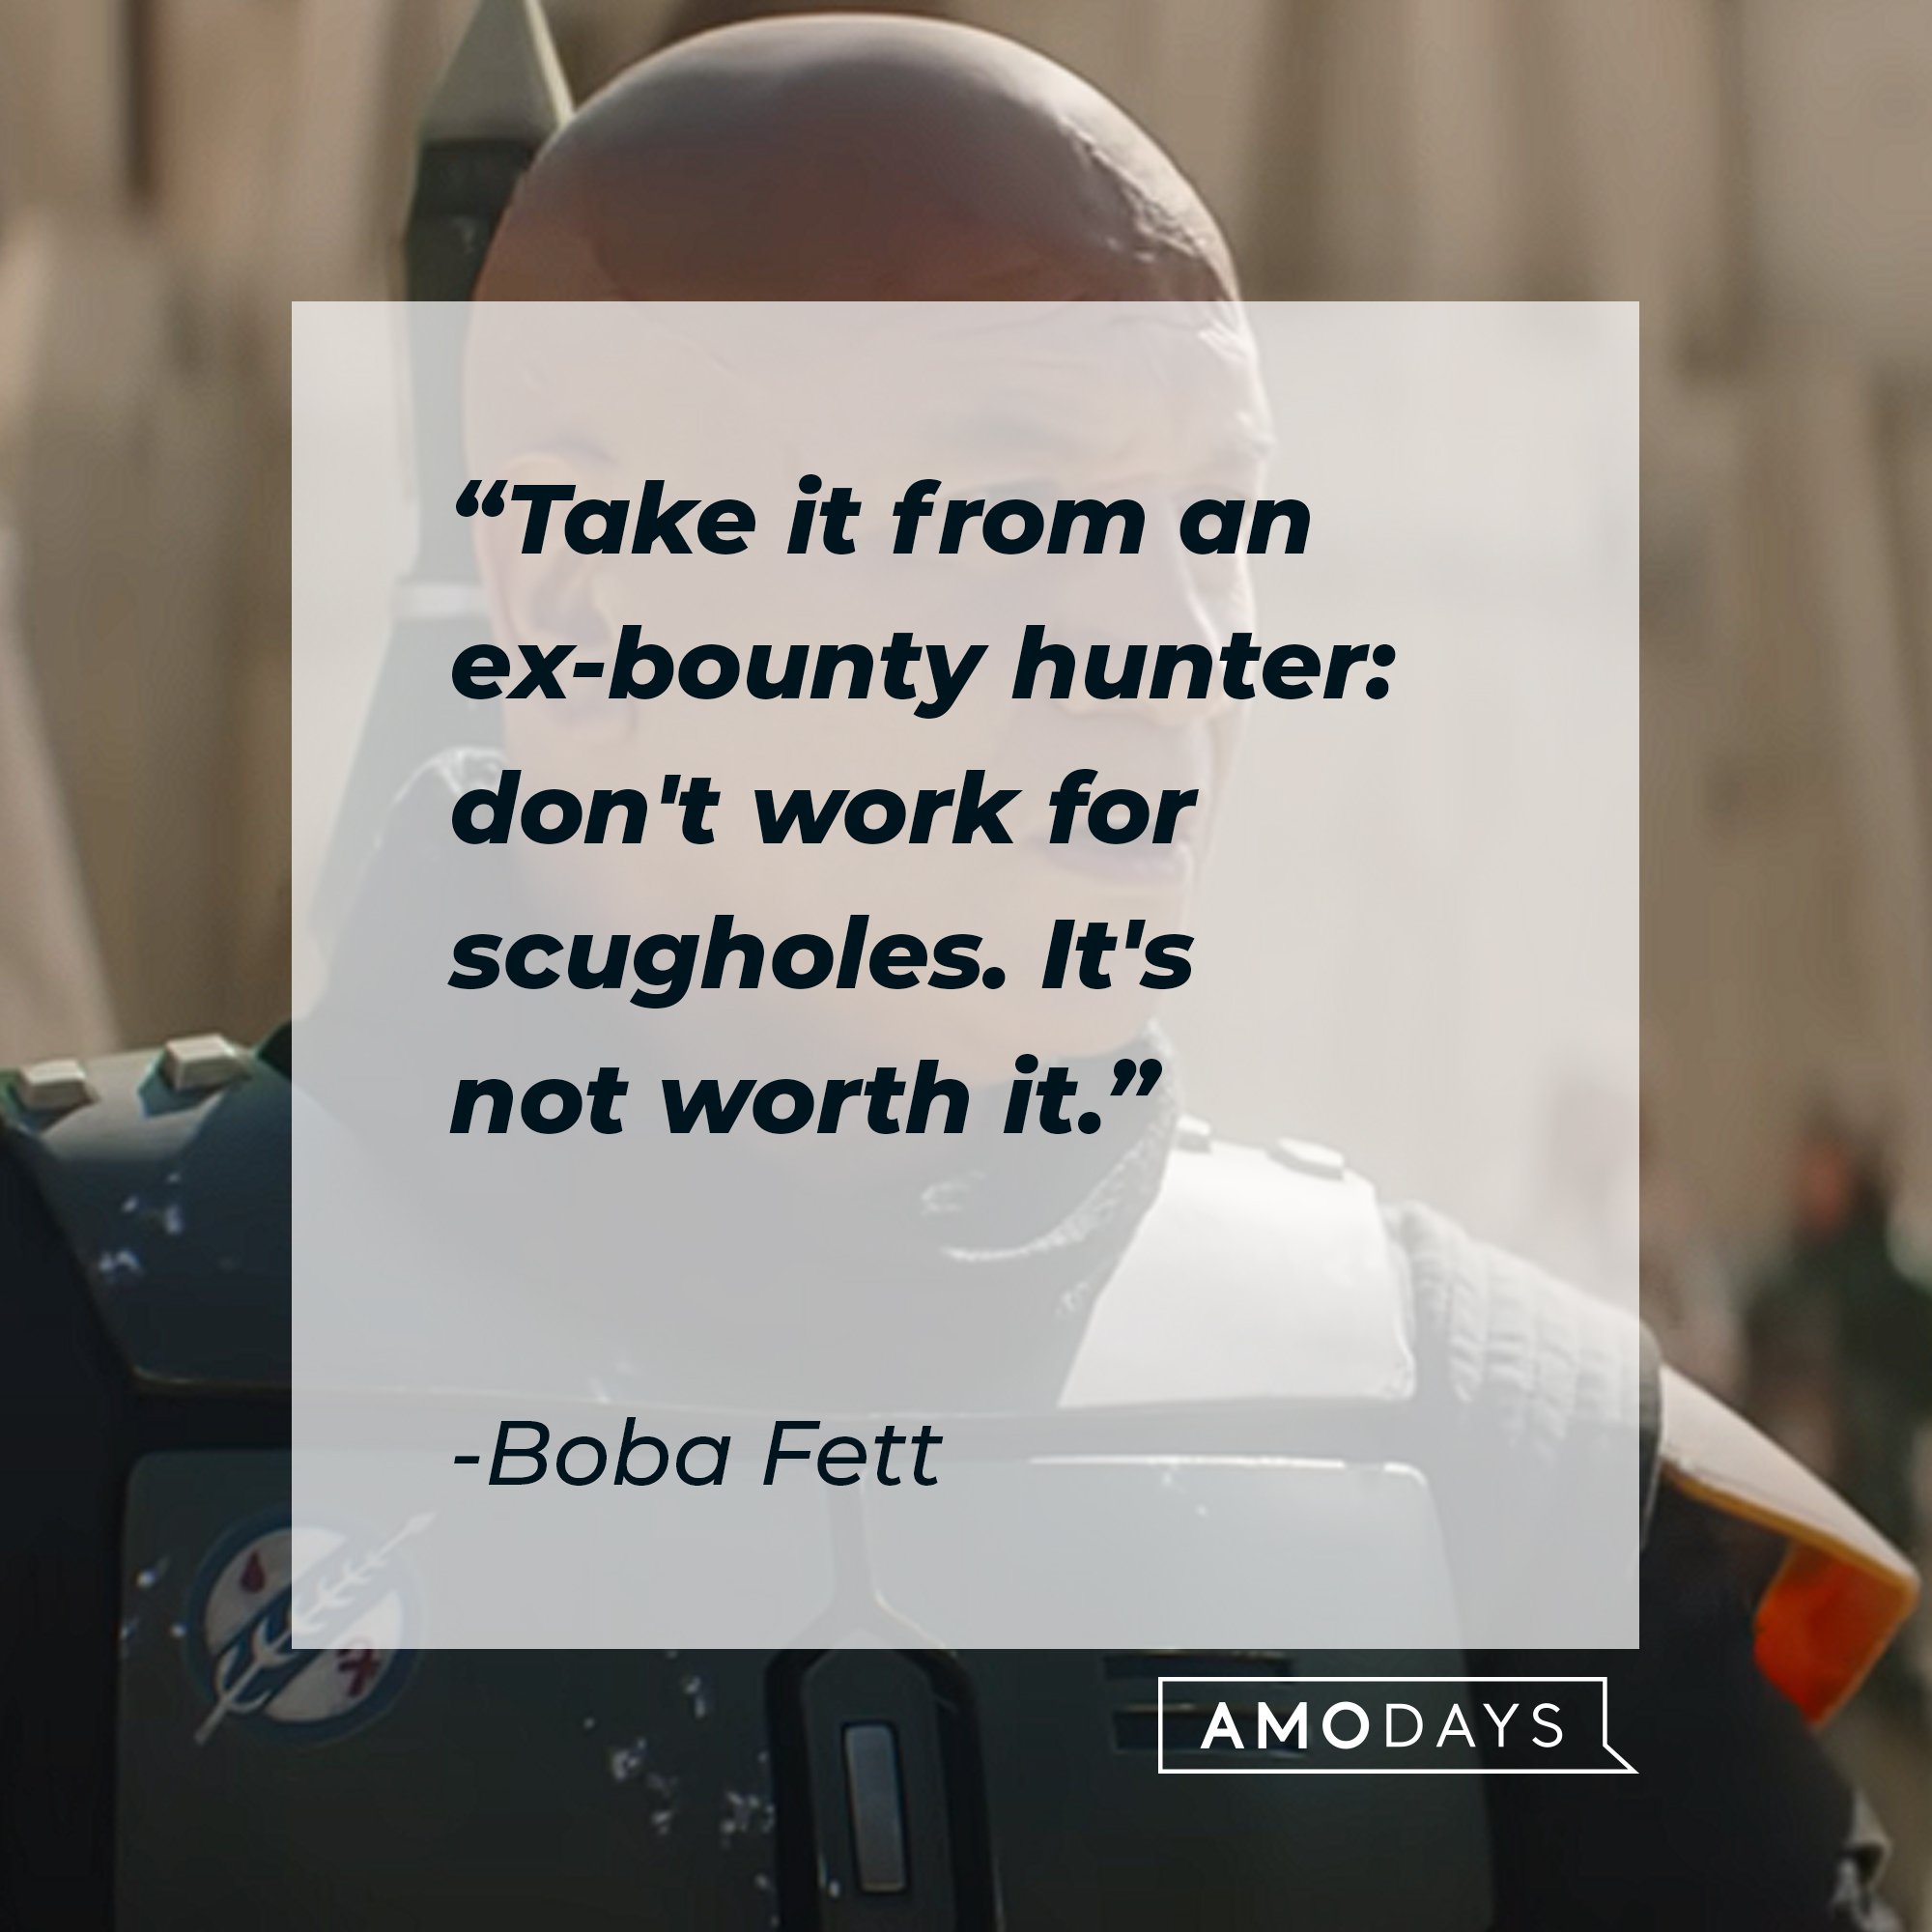 Boba Fett's quote: "Take it from an ex-bounty hunter: don't work for scugholes. It's not worth it." | Source: youtube.com/StarWars